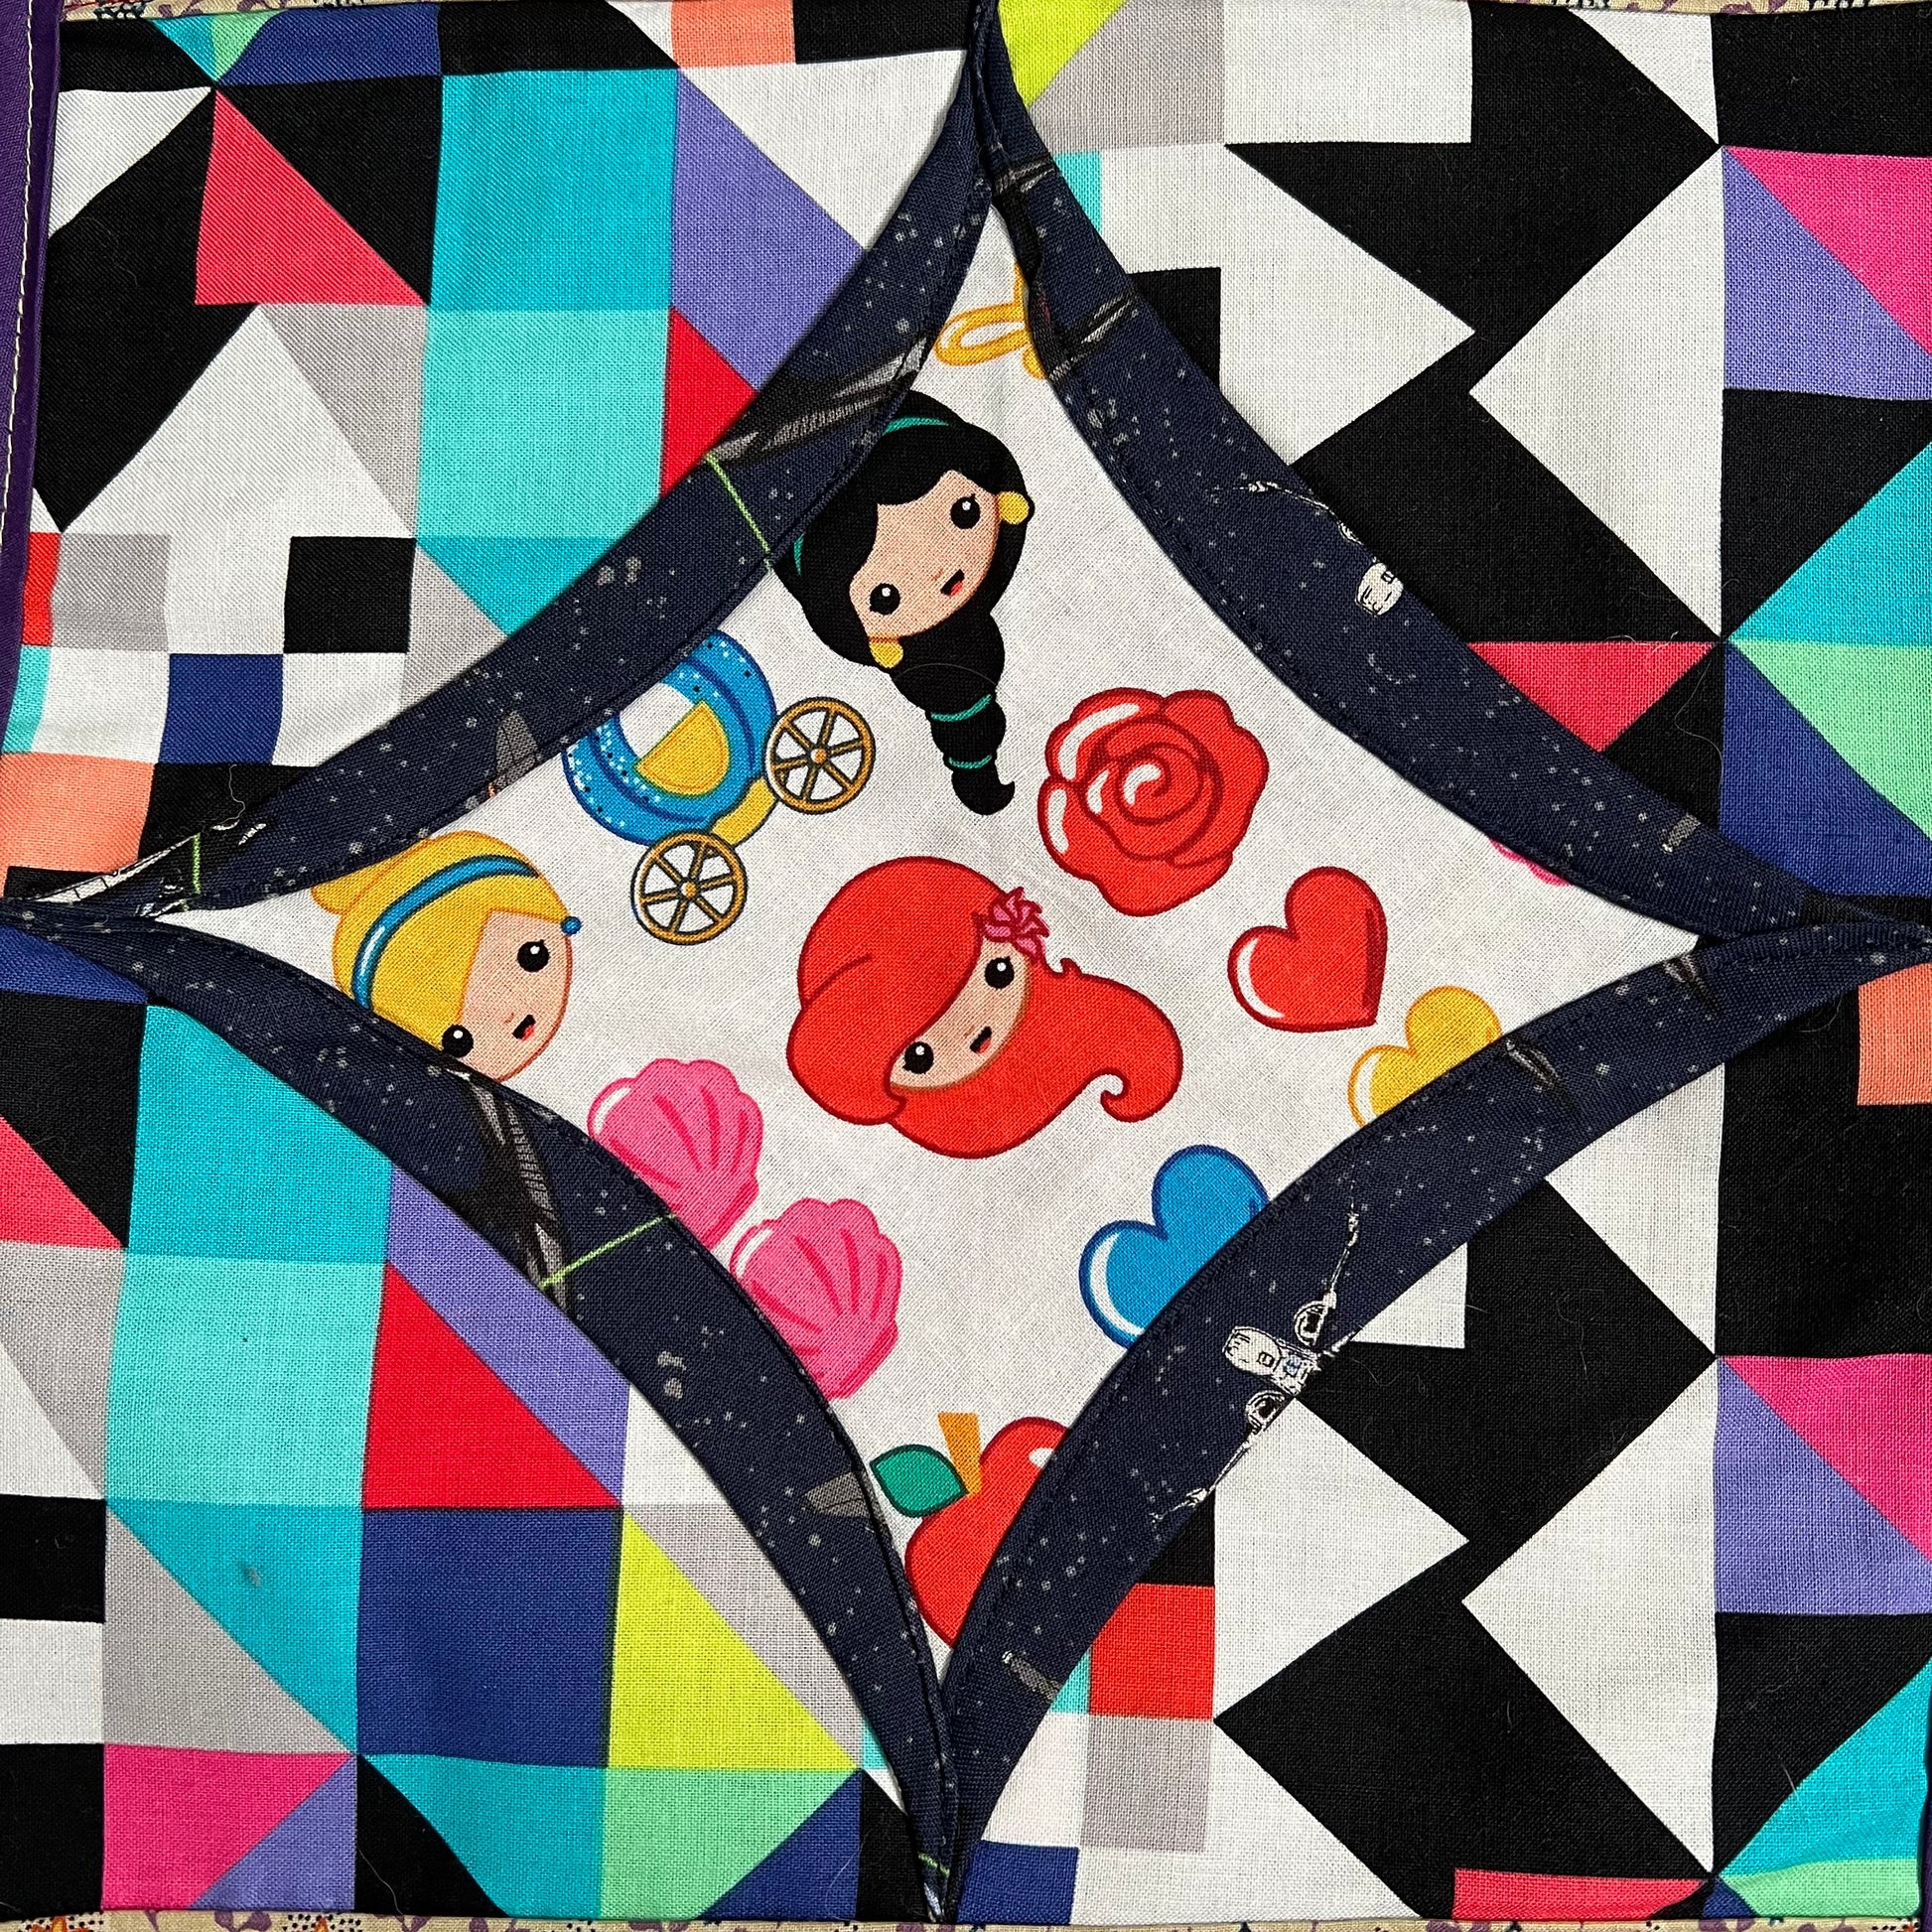 cartoon disney princesses fabric square, surrounded by starry navy, then colorful geometric fabric